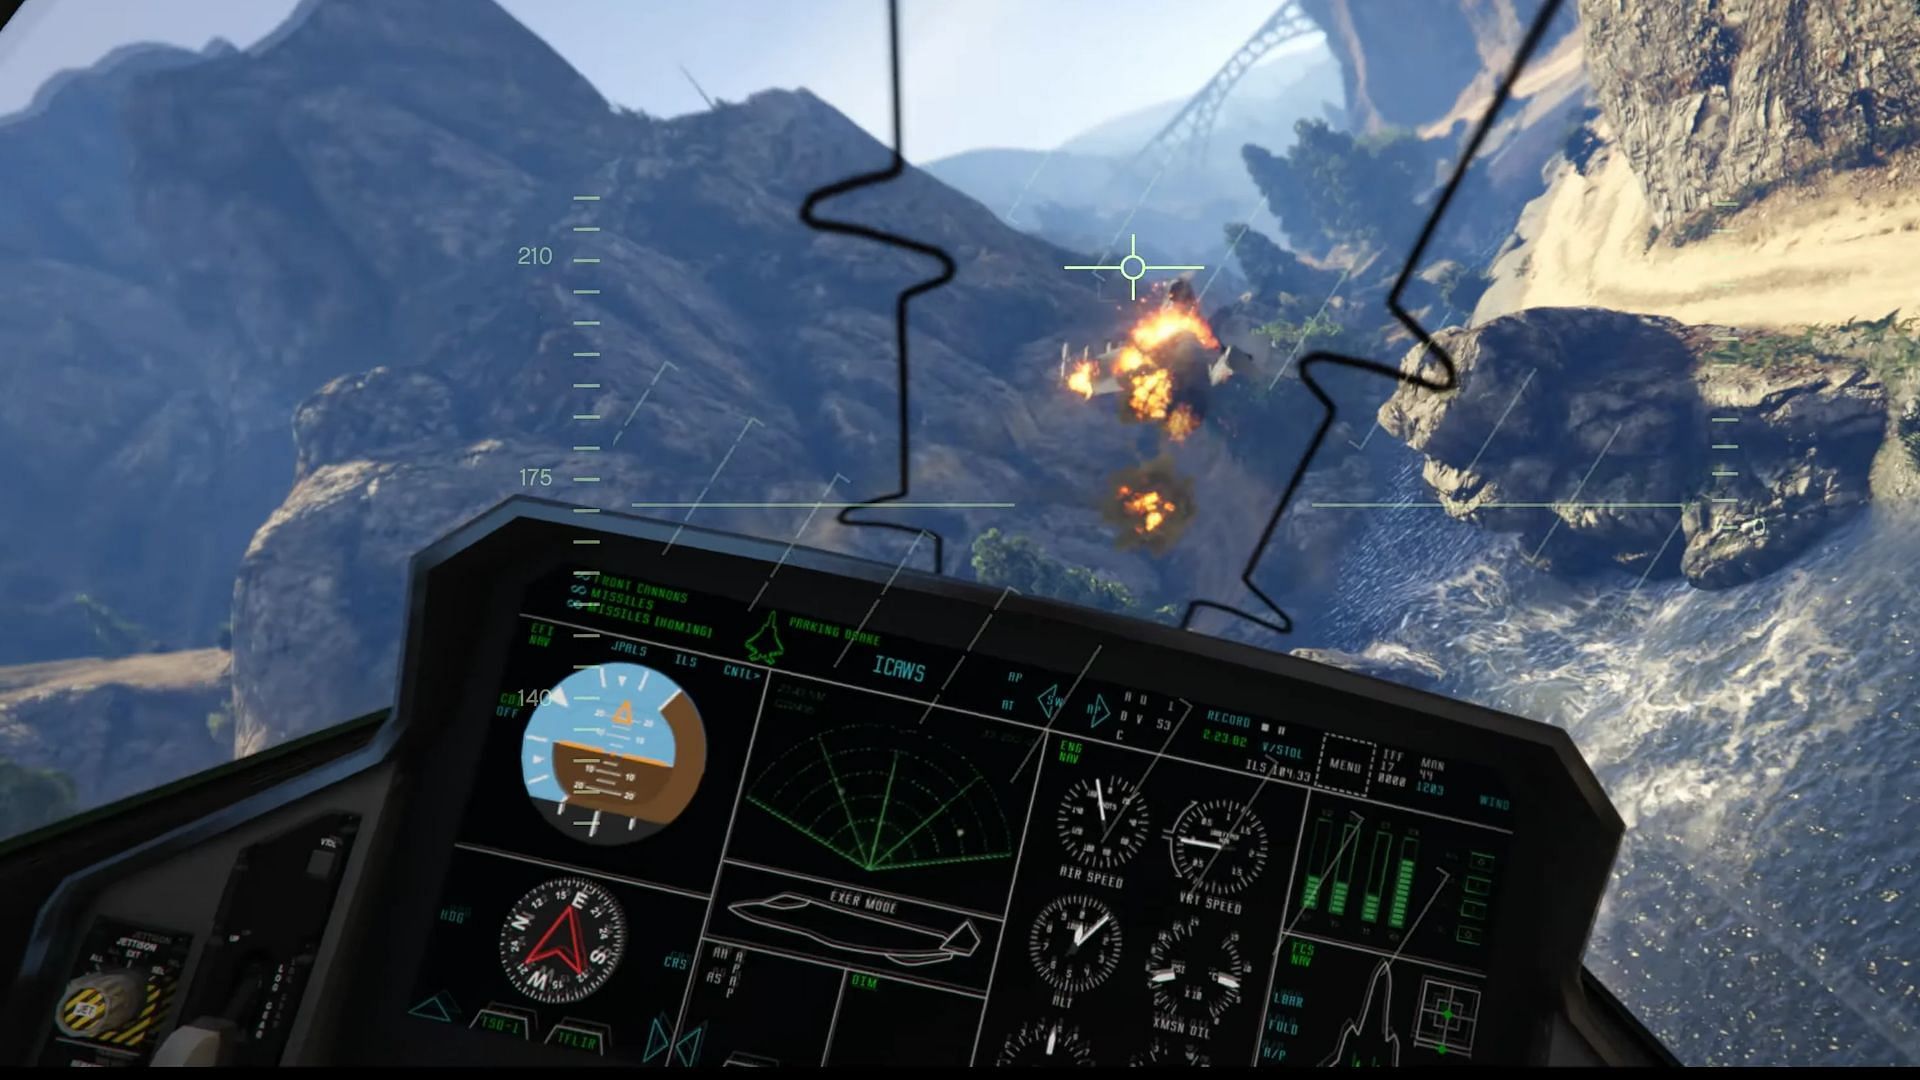 The weapons&#039; names are visible in the cockpit (Image via Rockstar Games)